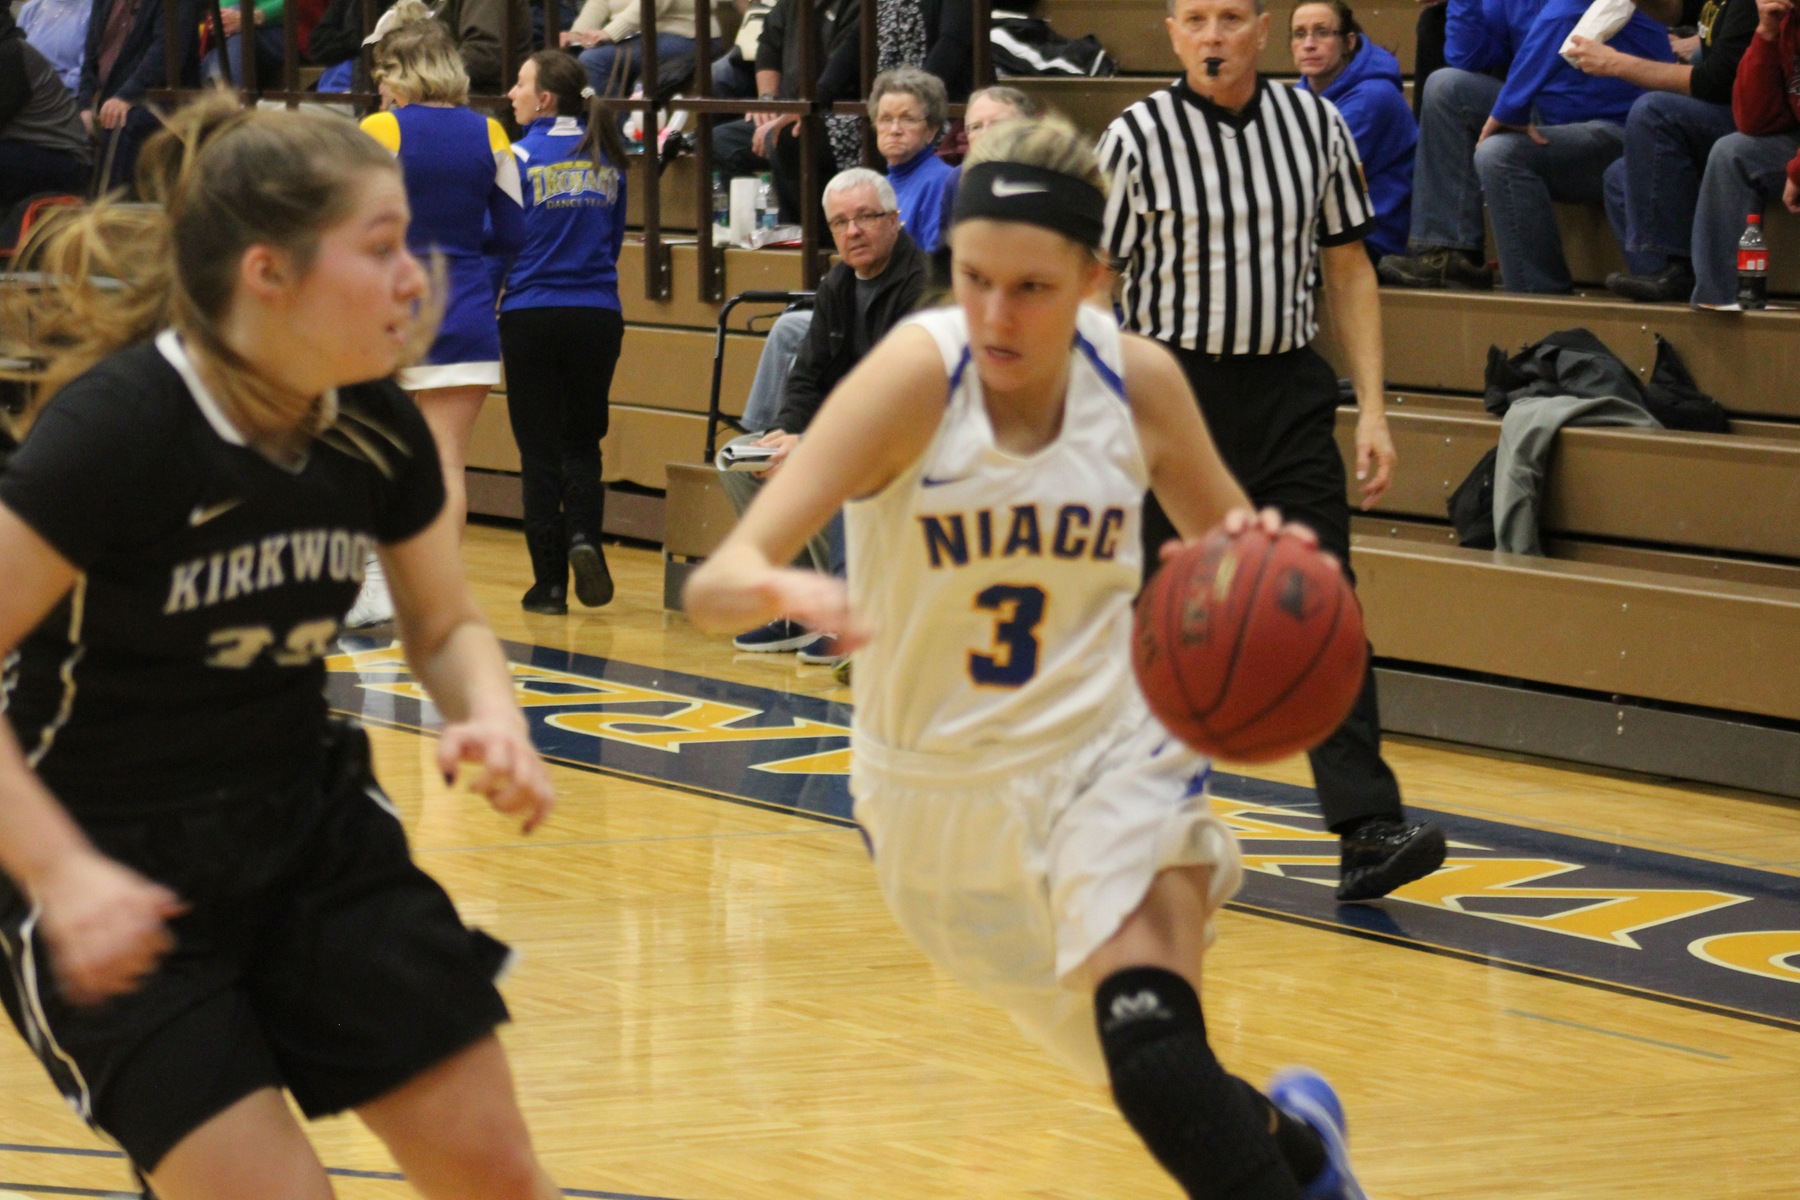 NIACC's Taylor Laabs drives to the basket during a game last season against Kirkwood.